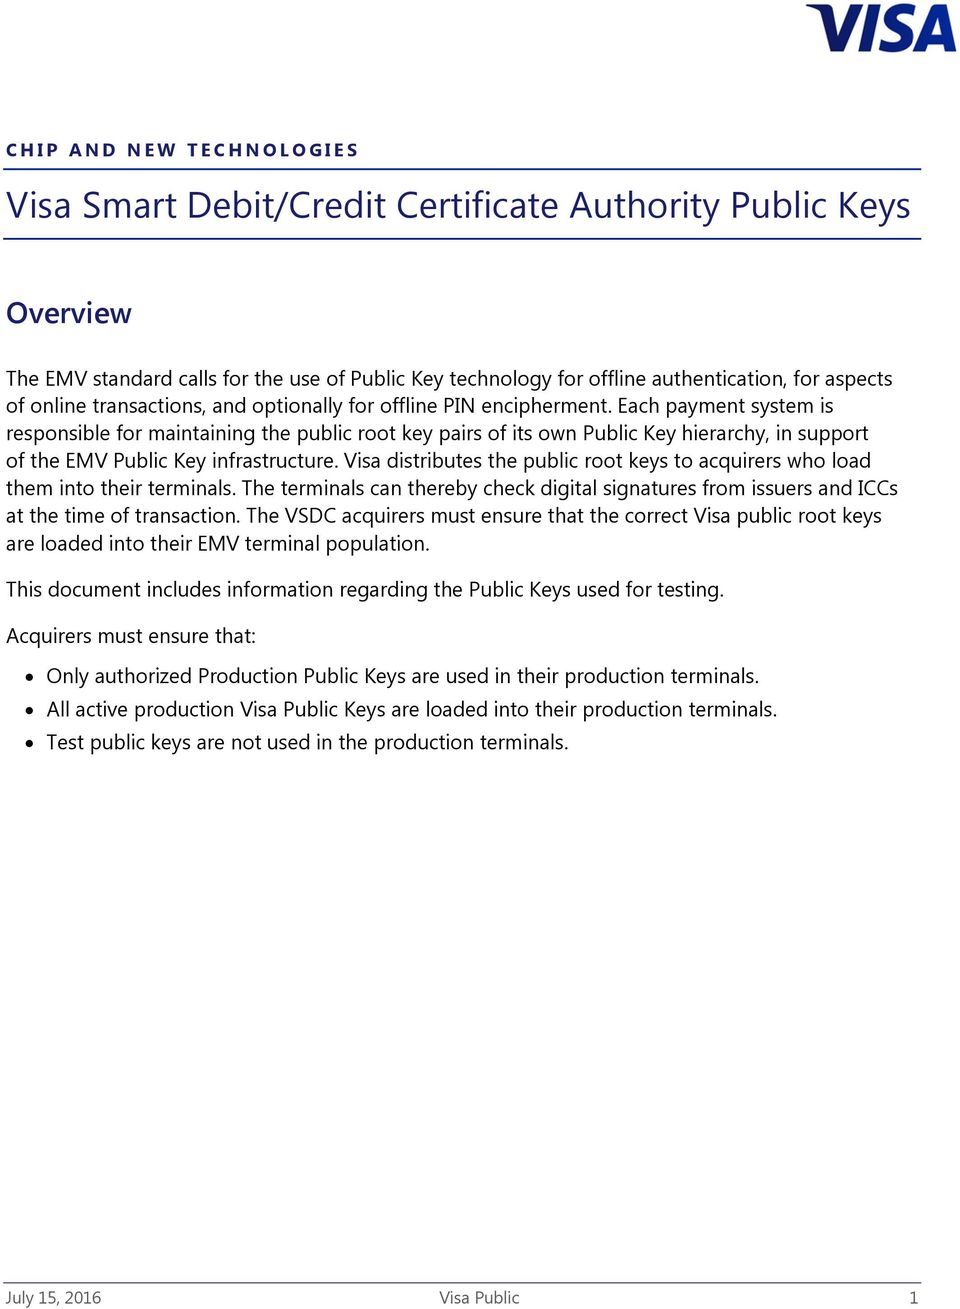 Each payment system is responsible for maintaining the public root key pairs of its own Public Key hierarchy, in support of the EMV Public Key infrastructure.